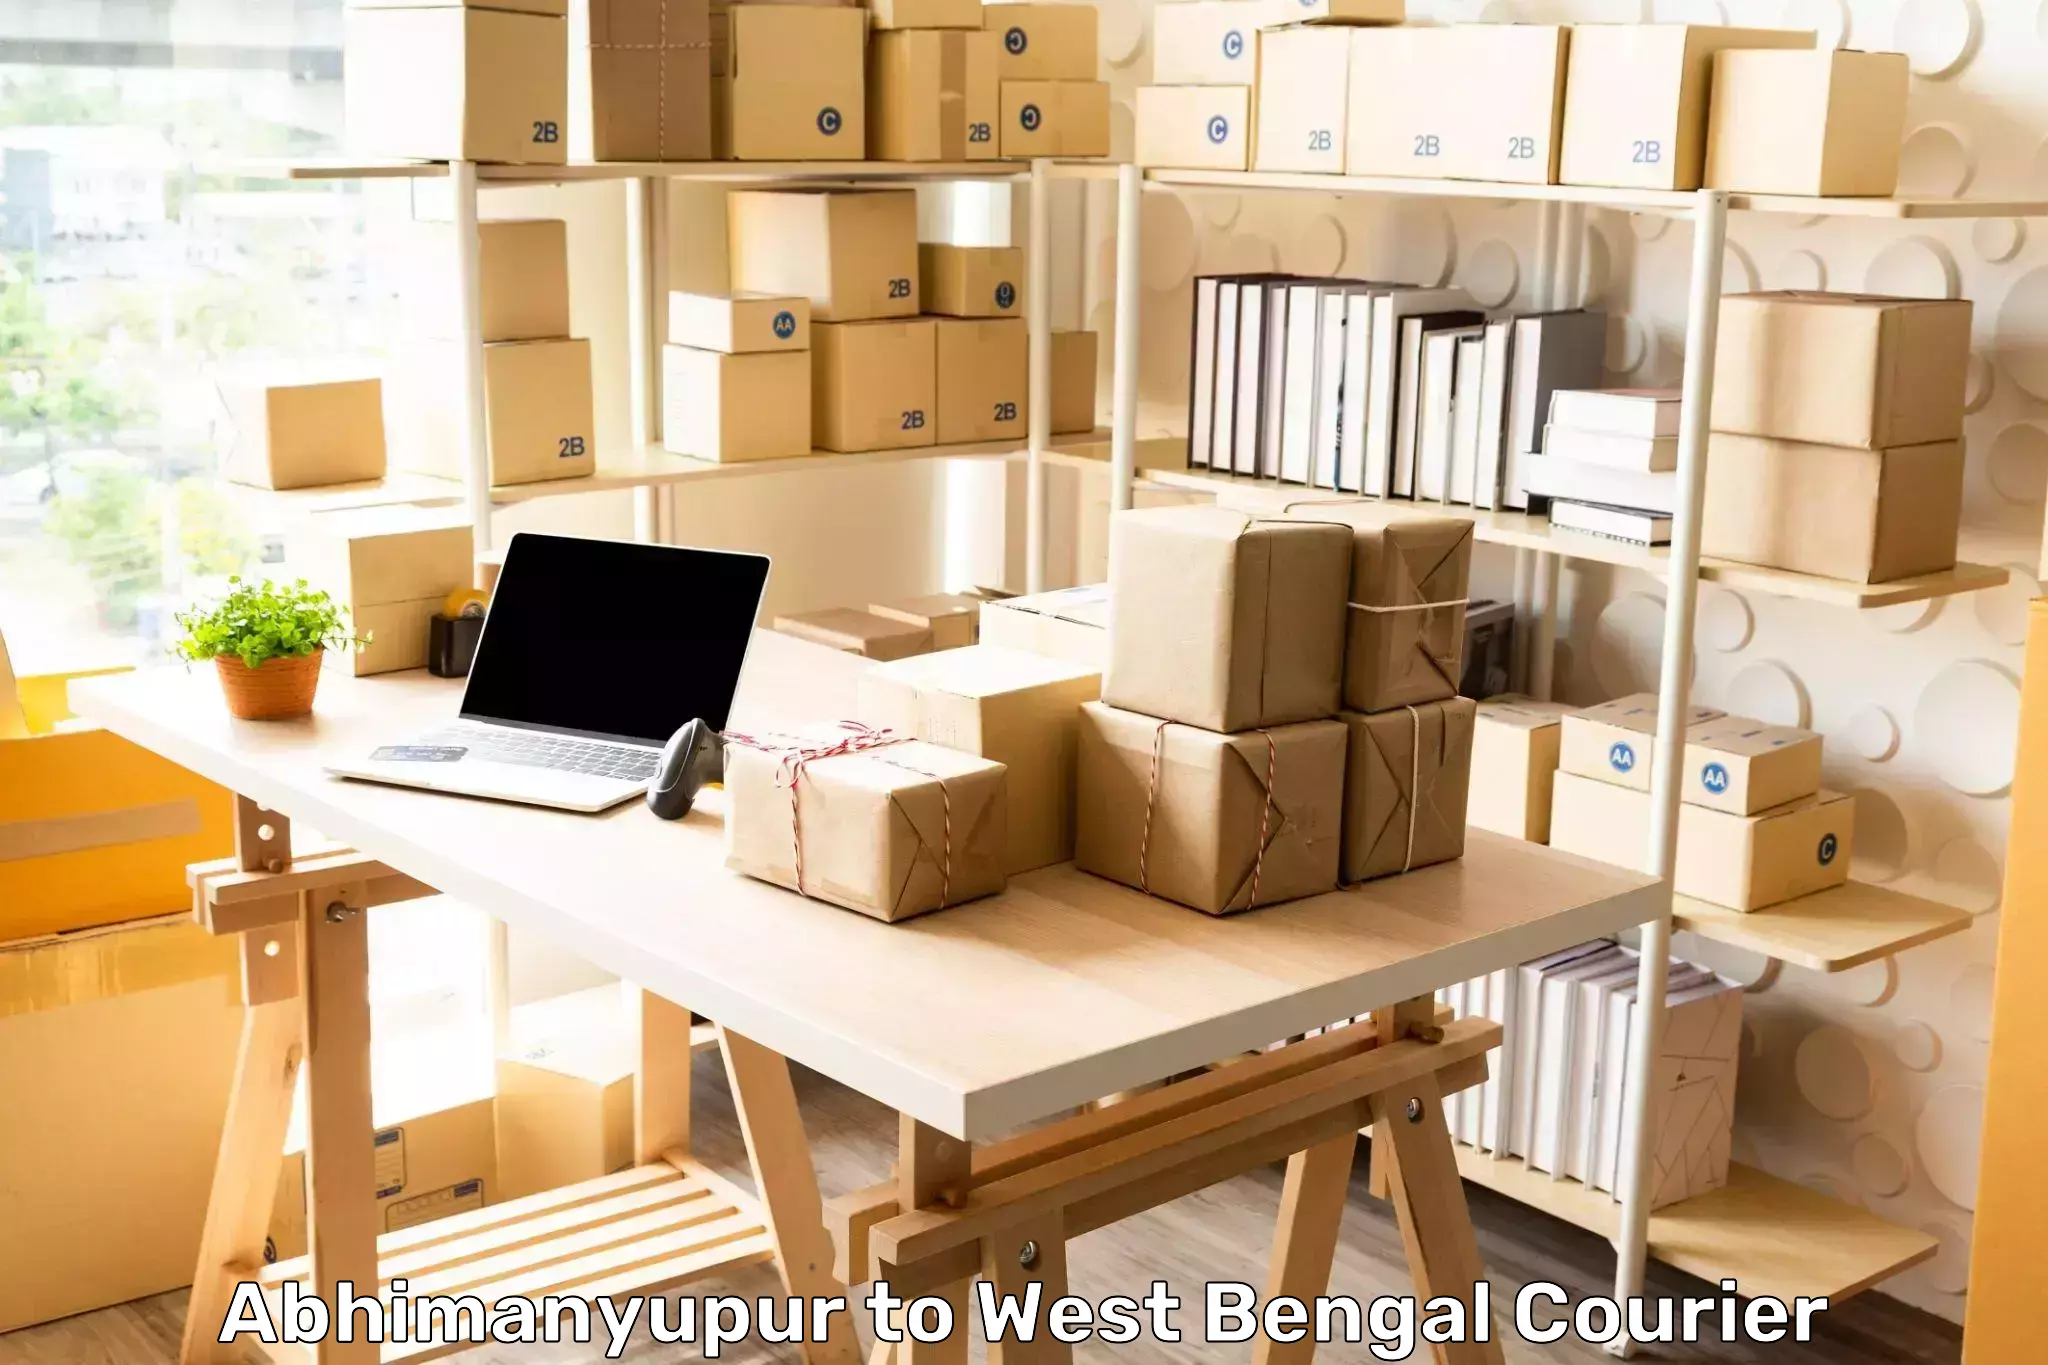 Flexible delivery schedules Abhimanyupur to Howrah